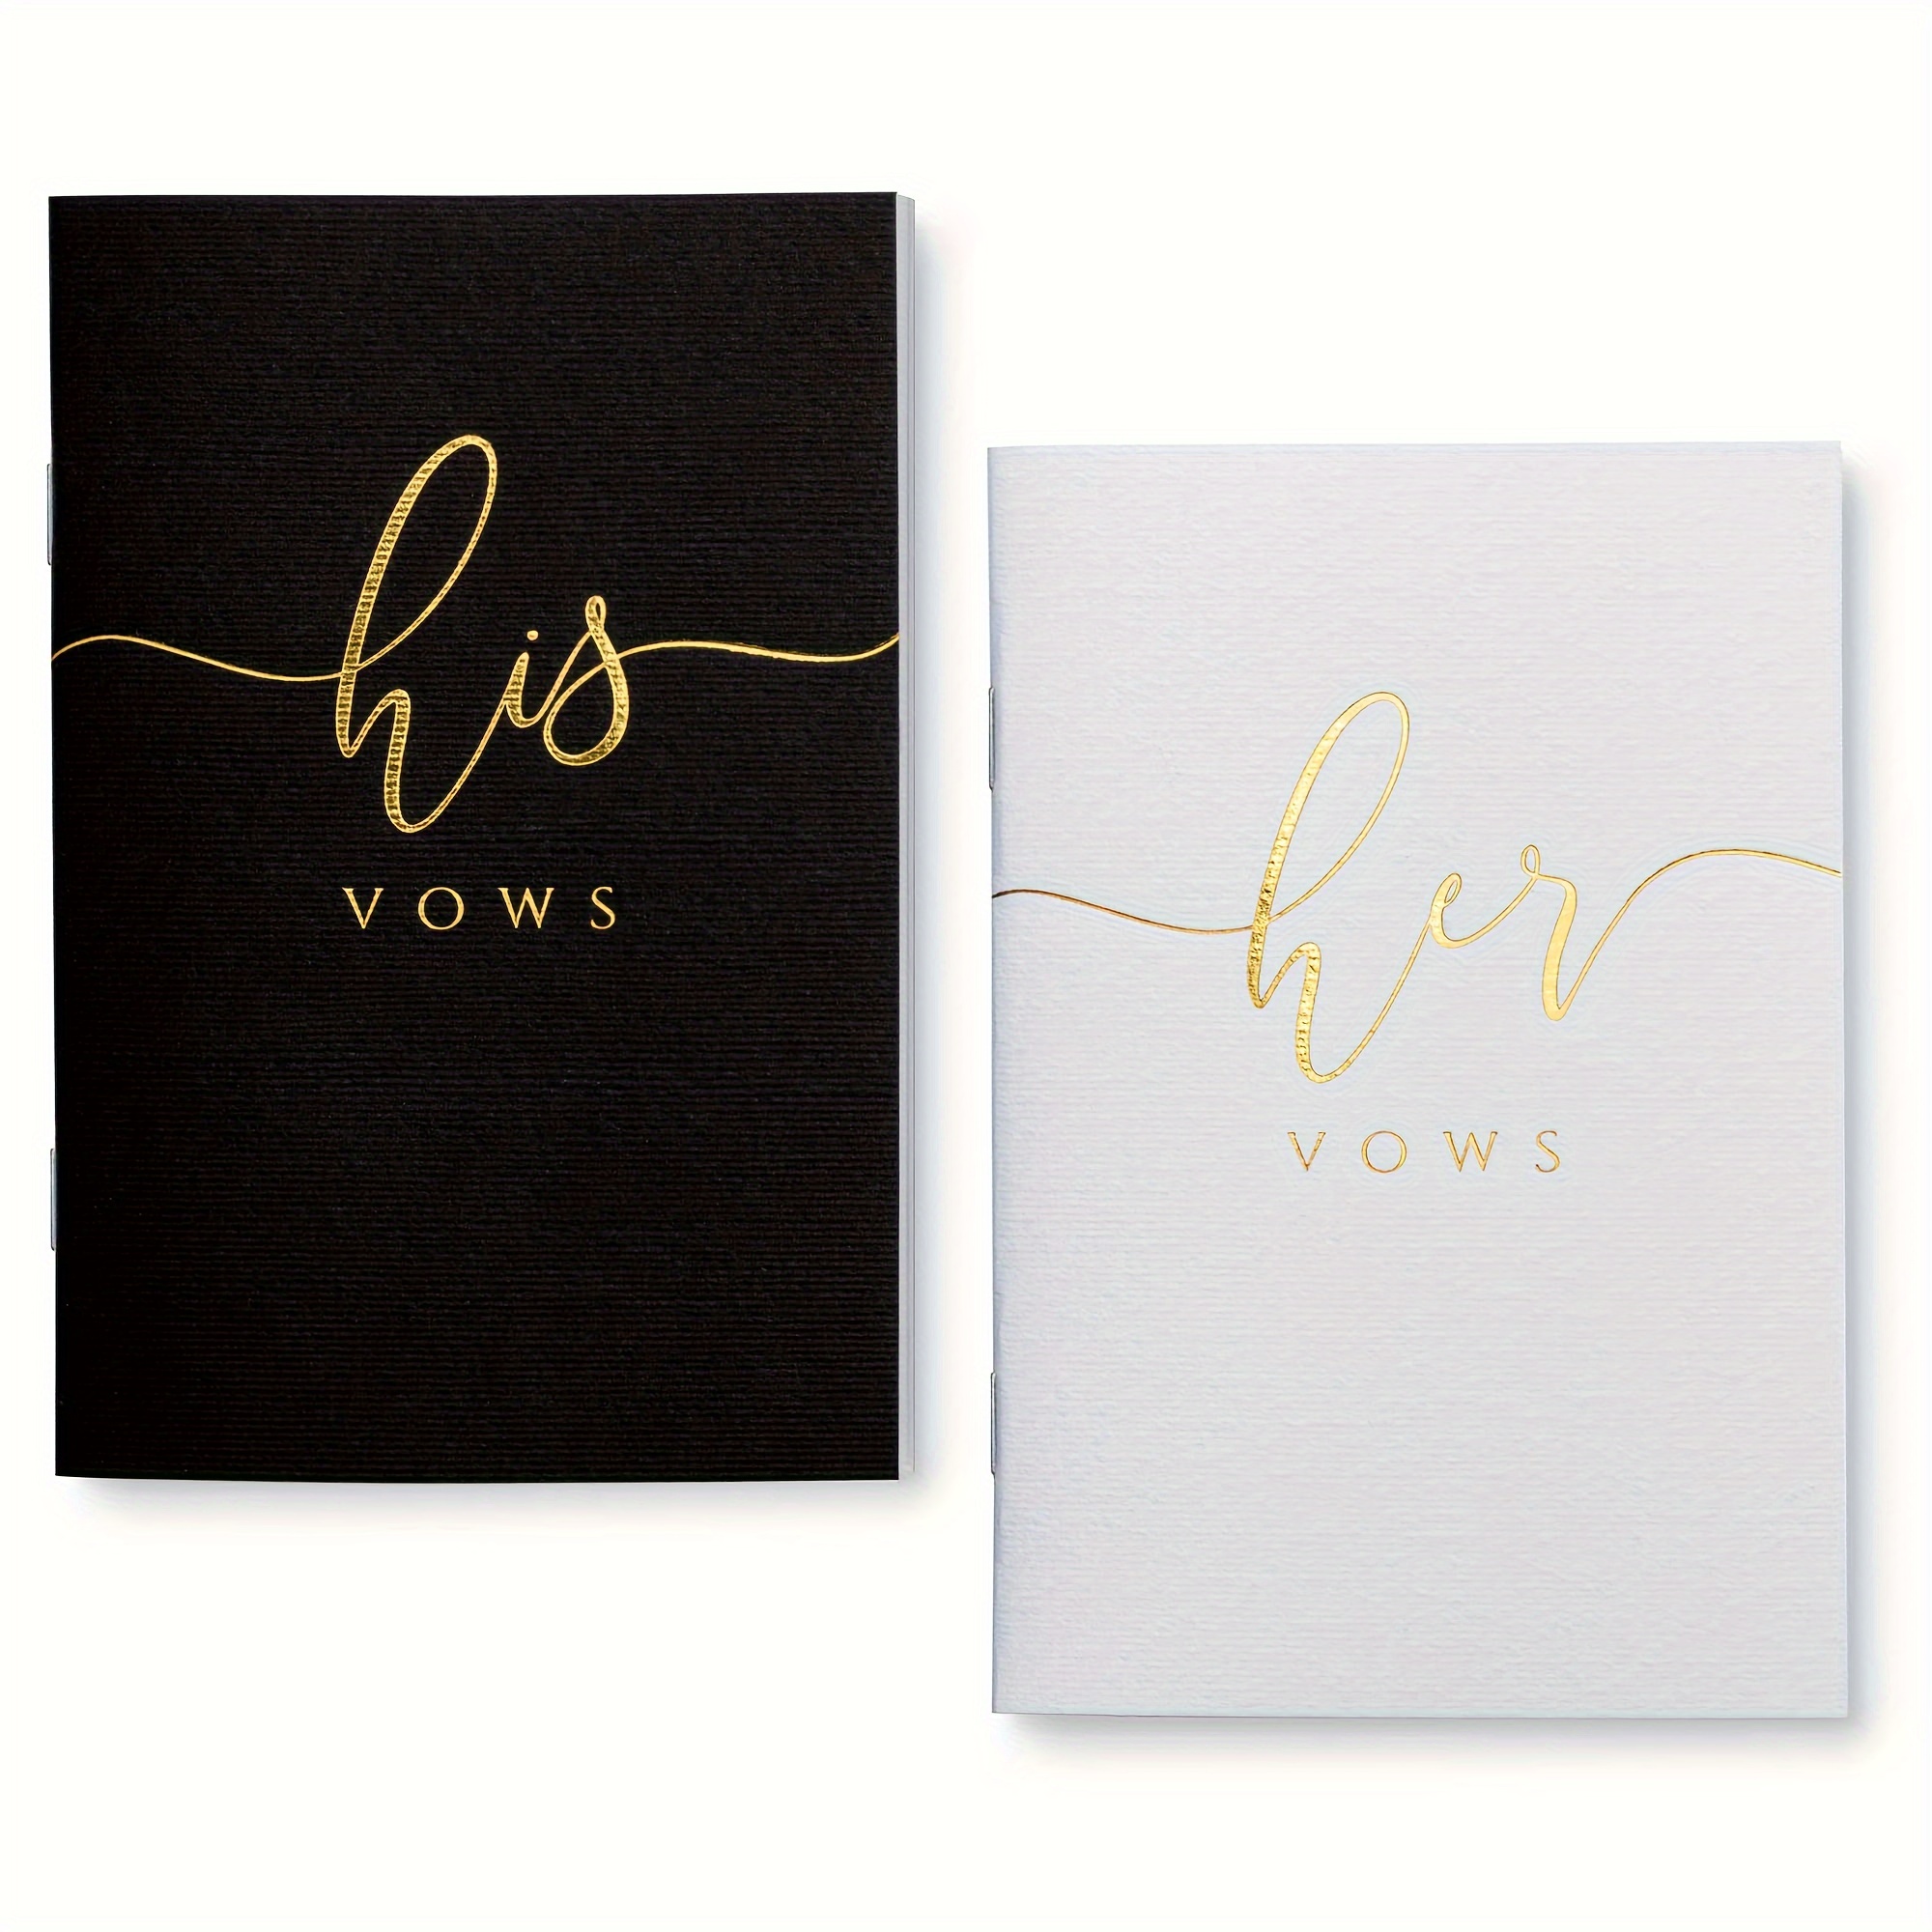 

2pcs Vow Books For Wedding Vow Books Wedding Gift For Bride And Groom Vows Book His And Hers With 28 Pages - 5.5 * 4.0 Inch 14cm*10cm In Wedding Notebook With Gilded Font